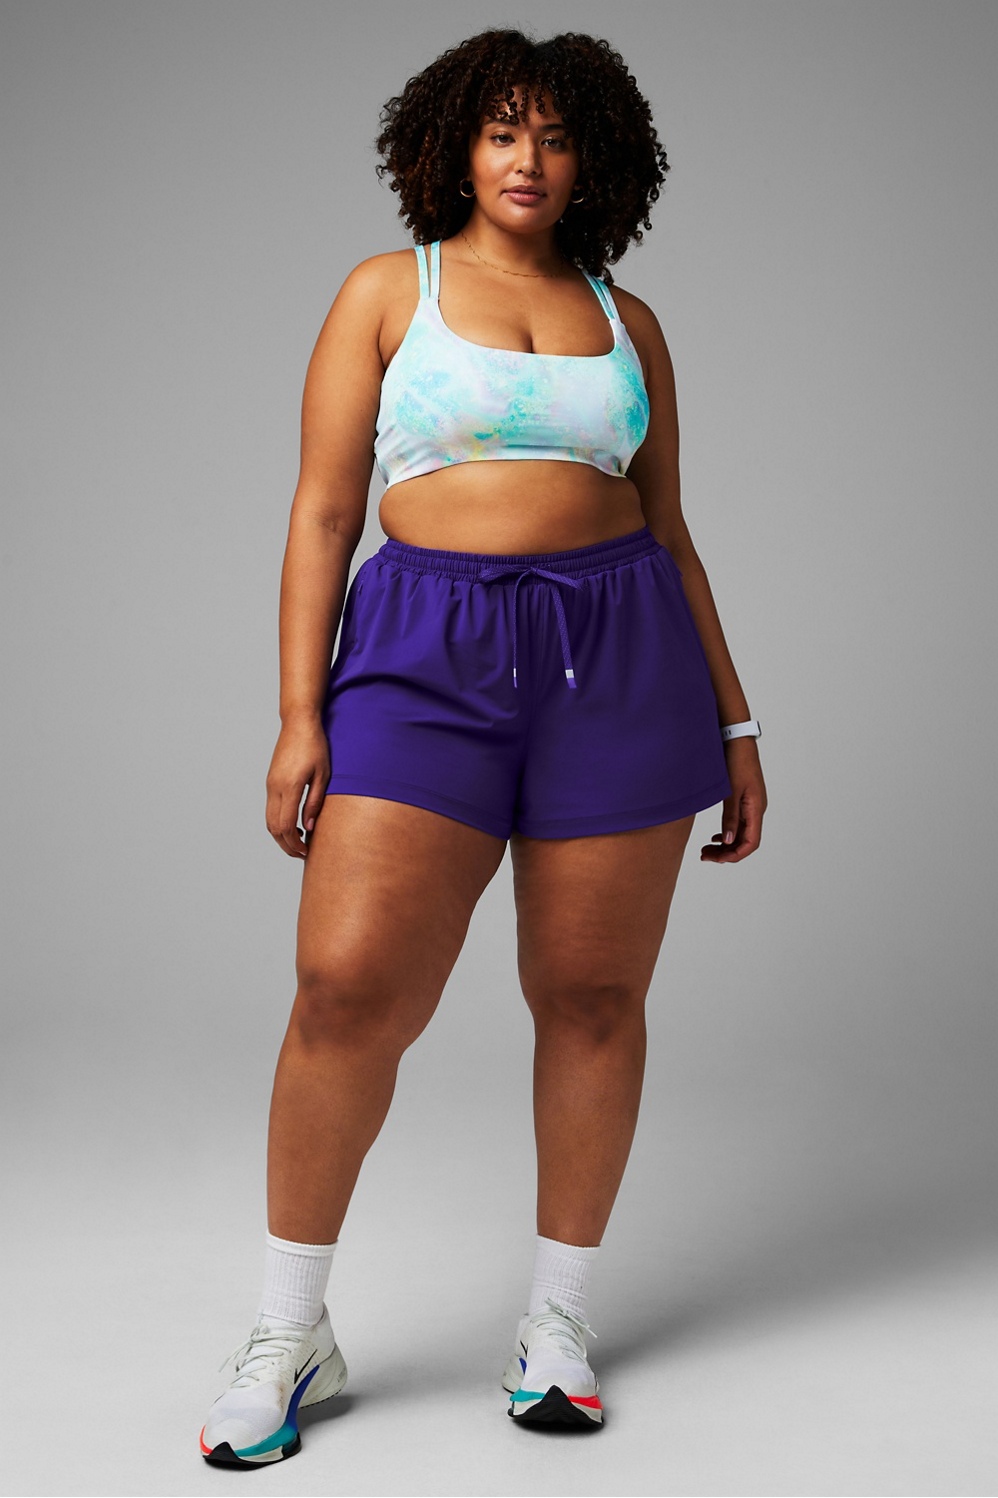 The One Short 3'' - Women's - Fabletics